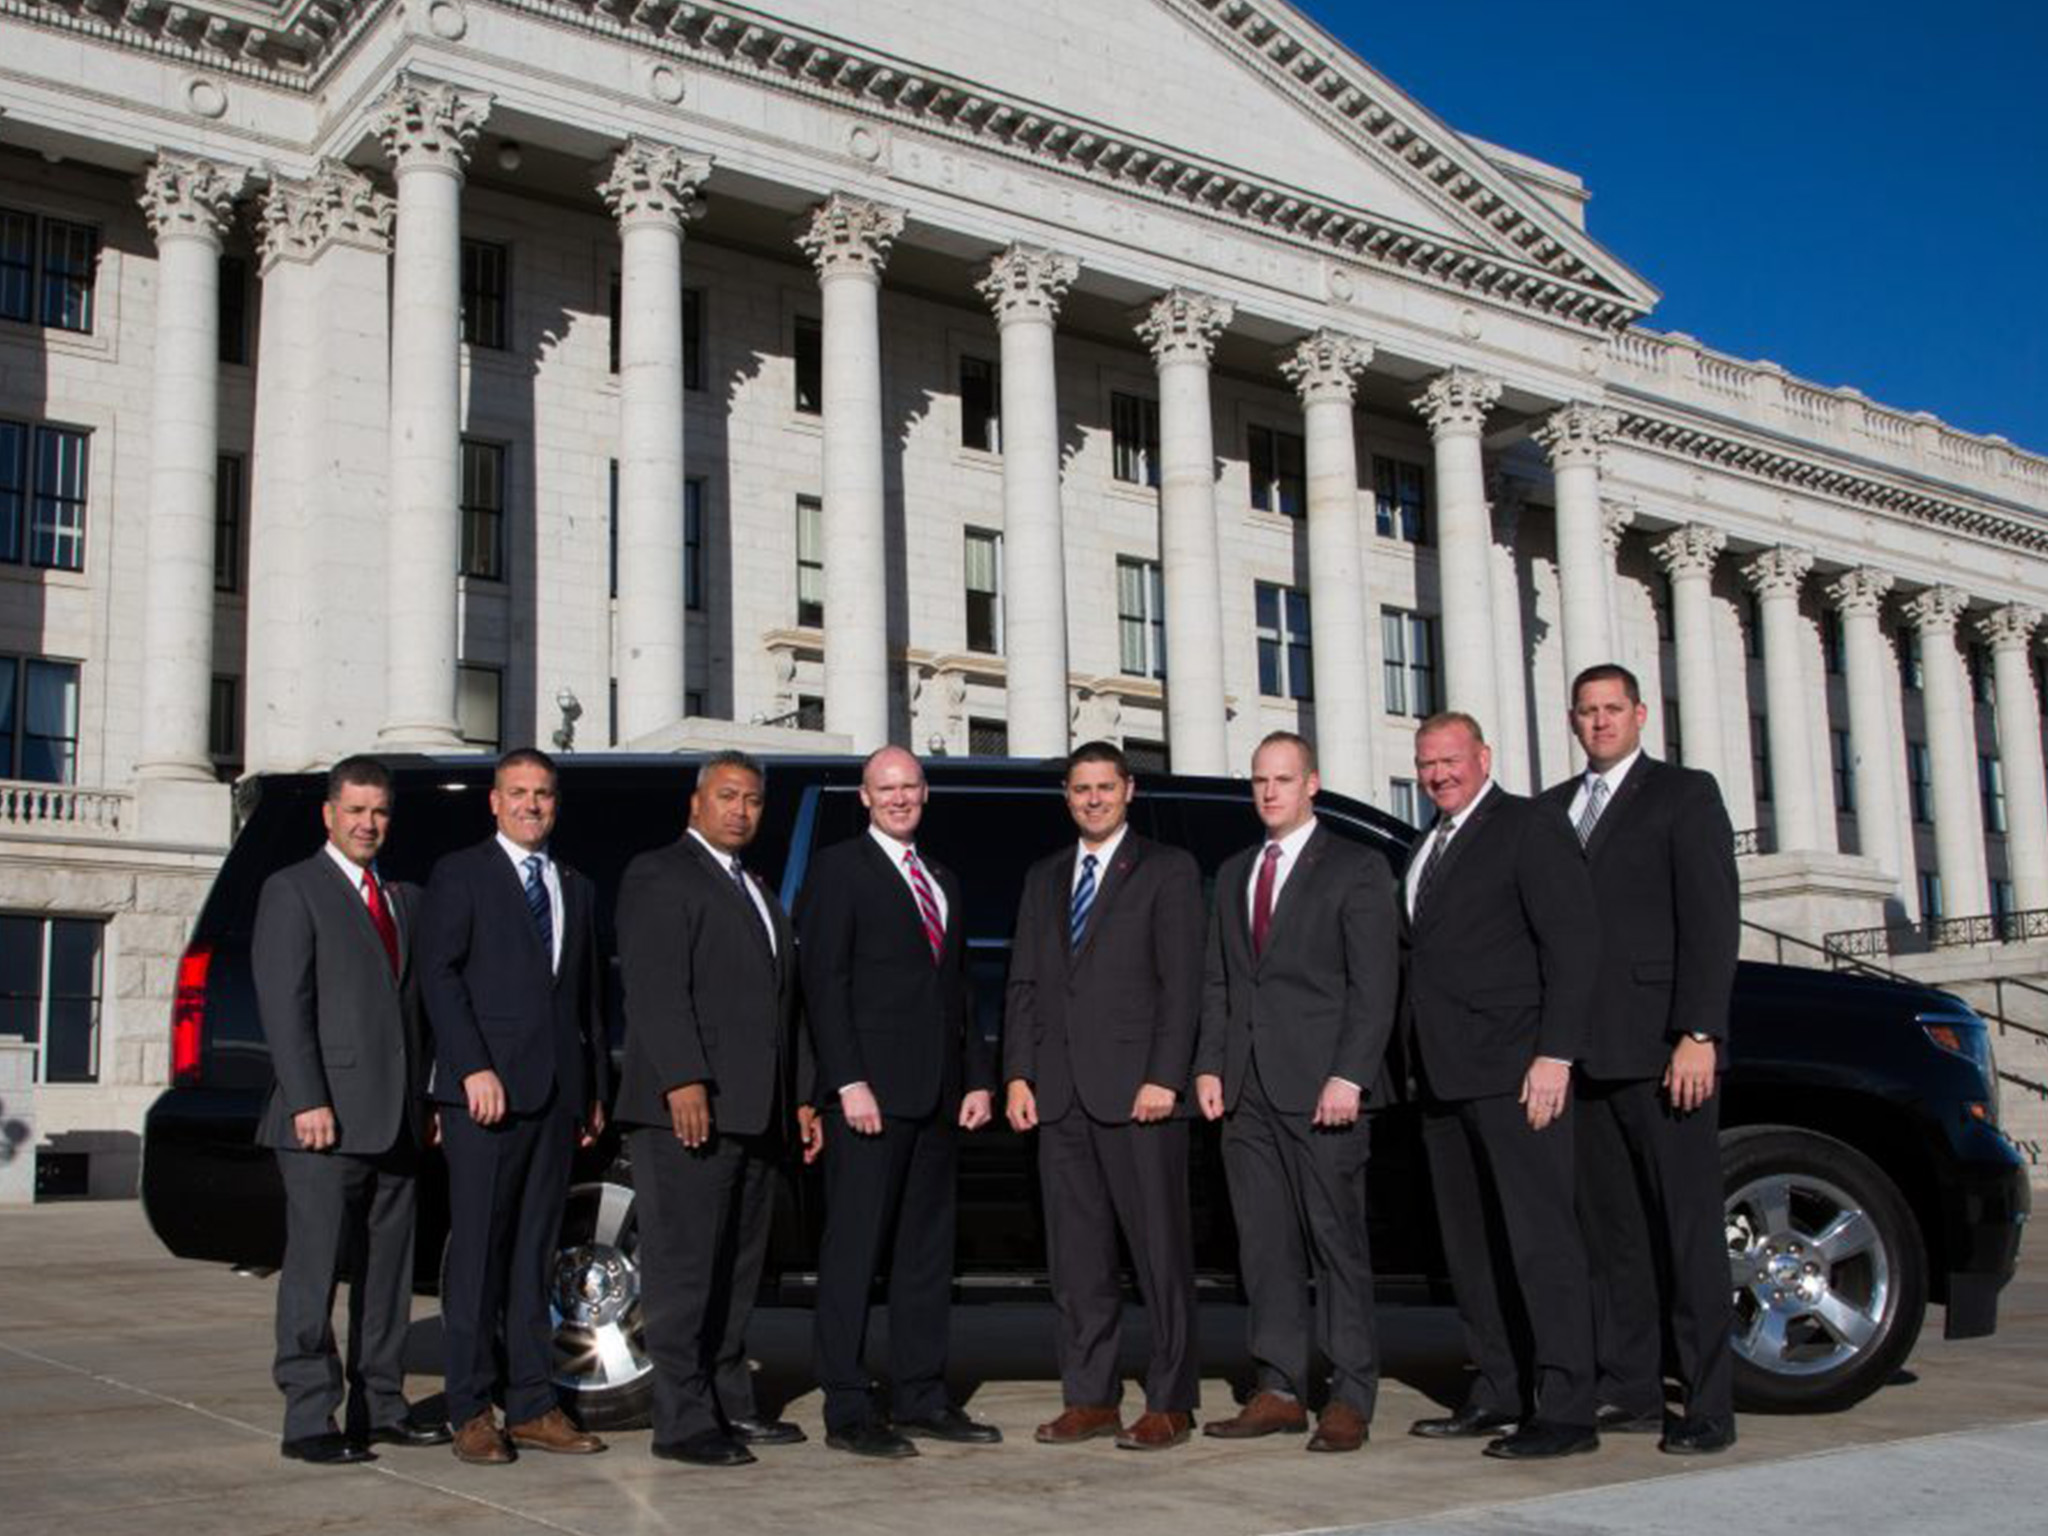 Eight members of the executive protection squad are wearing suits and standing in front of a a black SUV parked in front of the capitol.